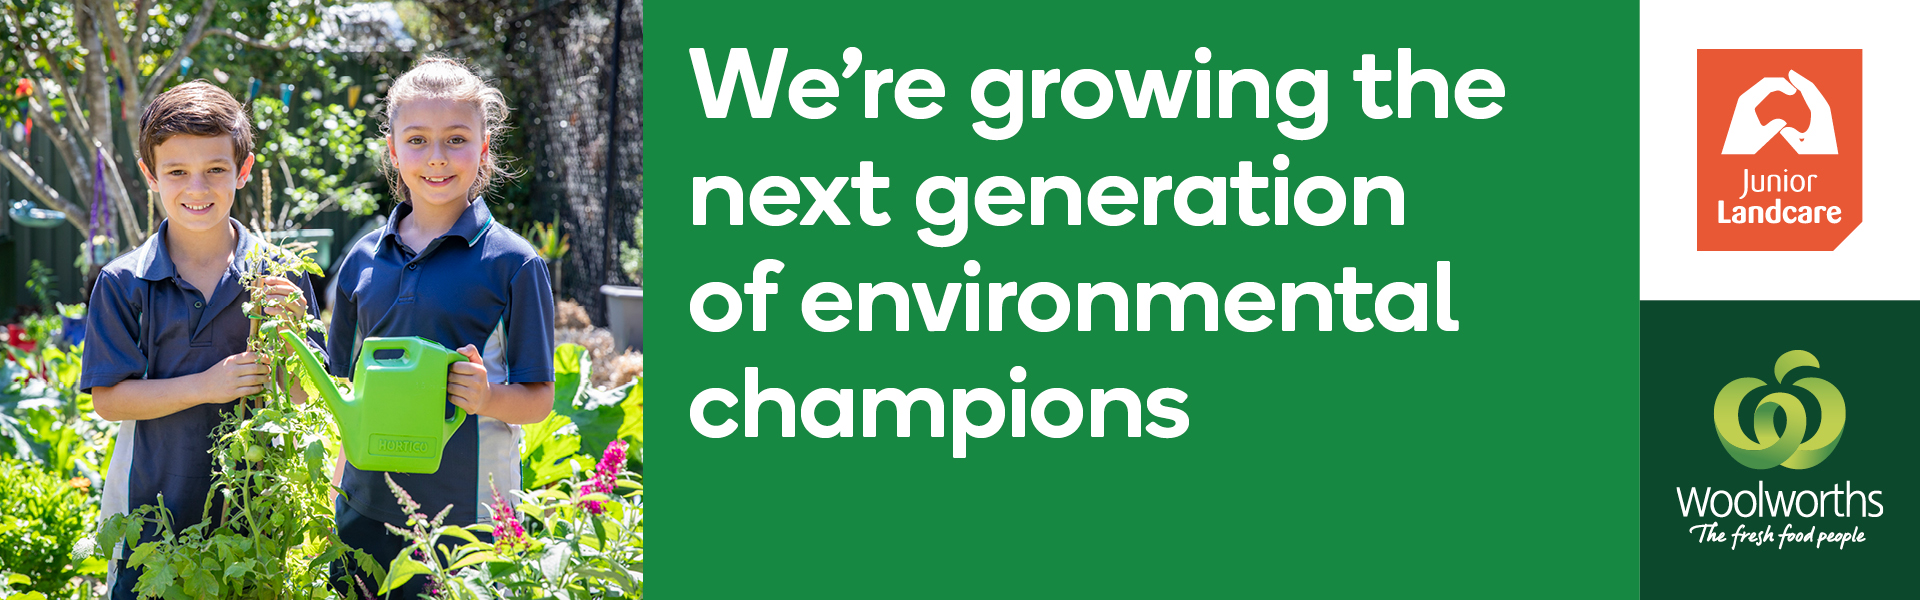 Apply for a grant today. Help us grow the next generation of environmental champions